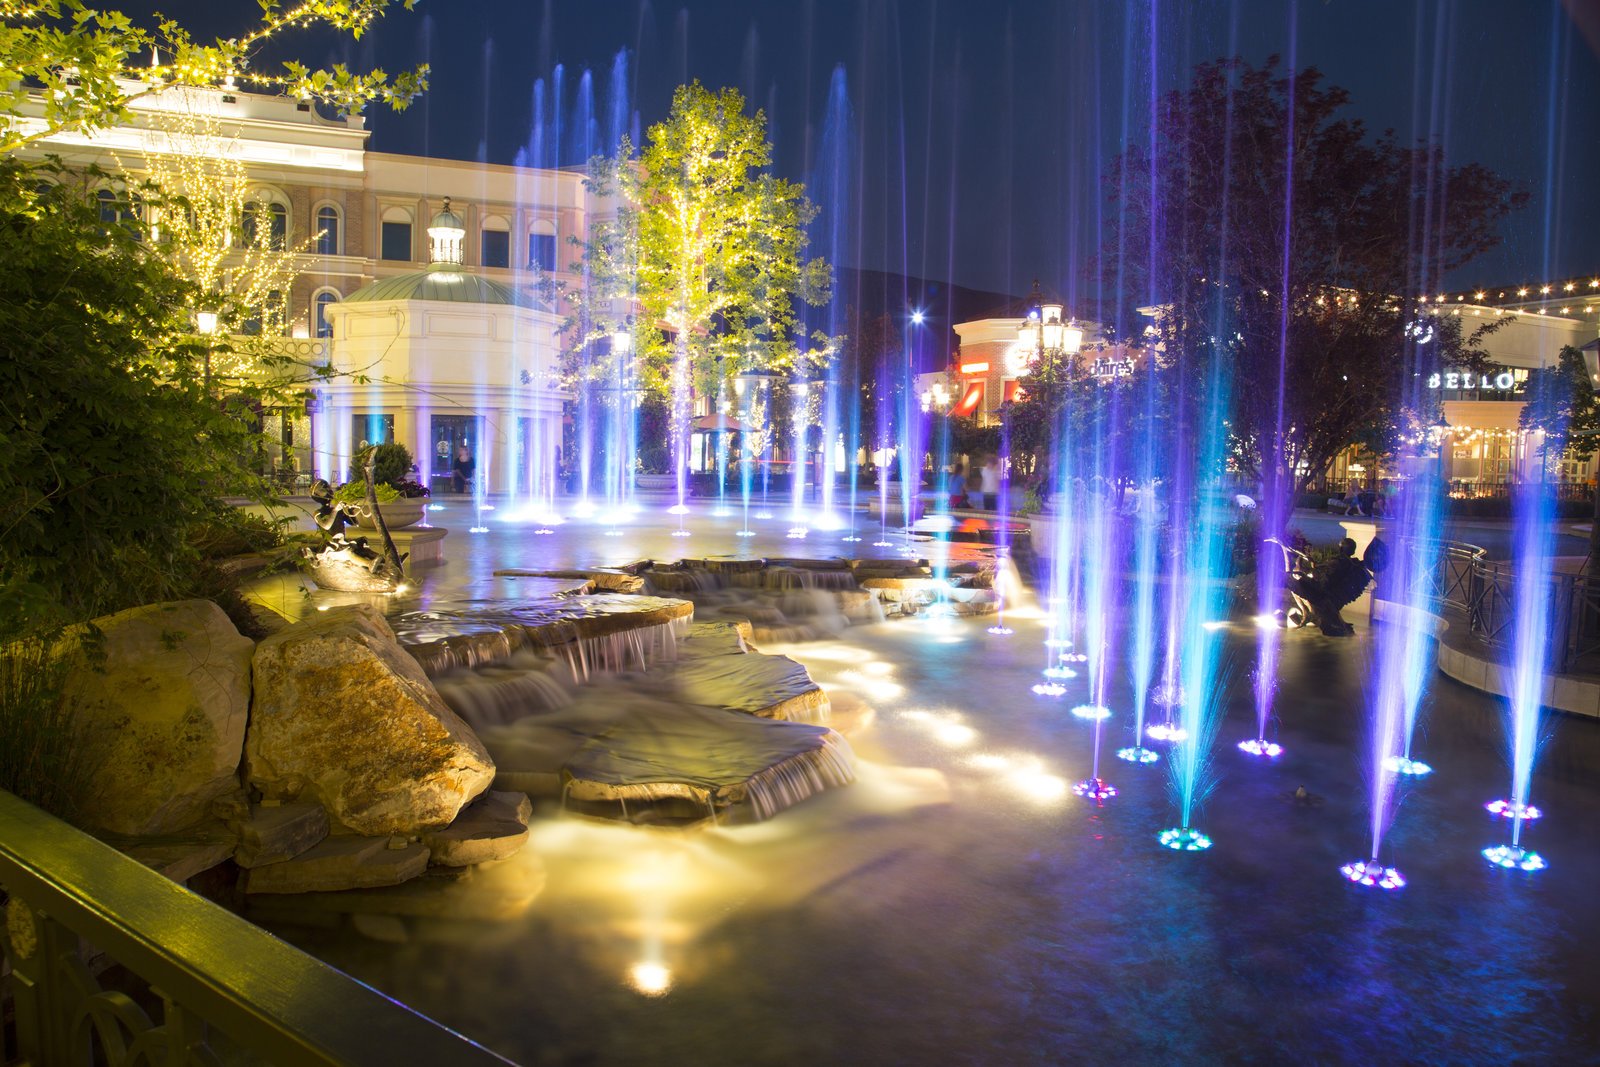 Station Park Show Fountain at night